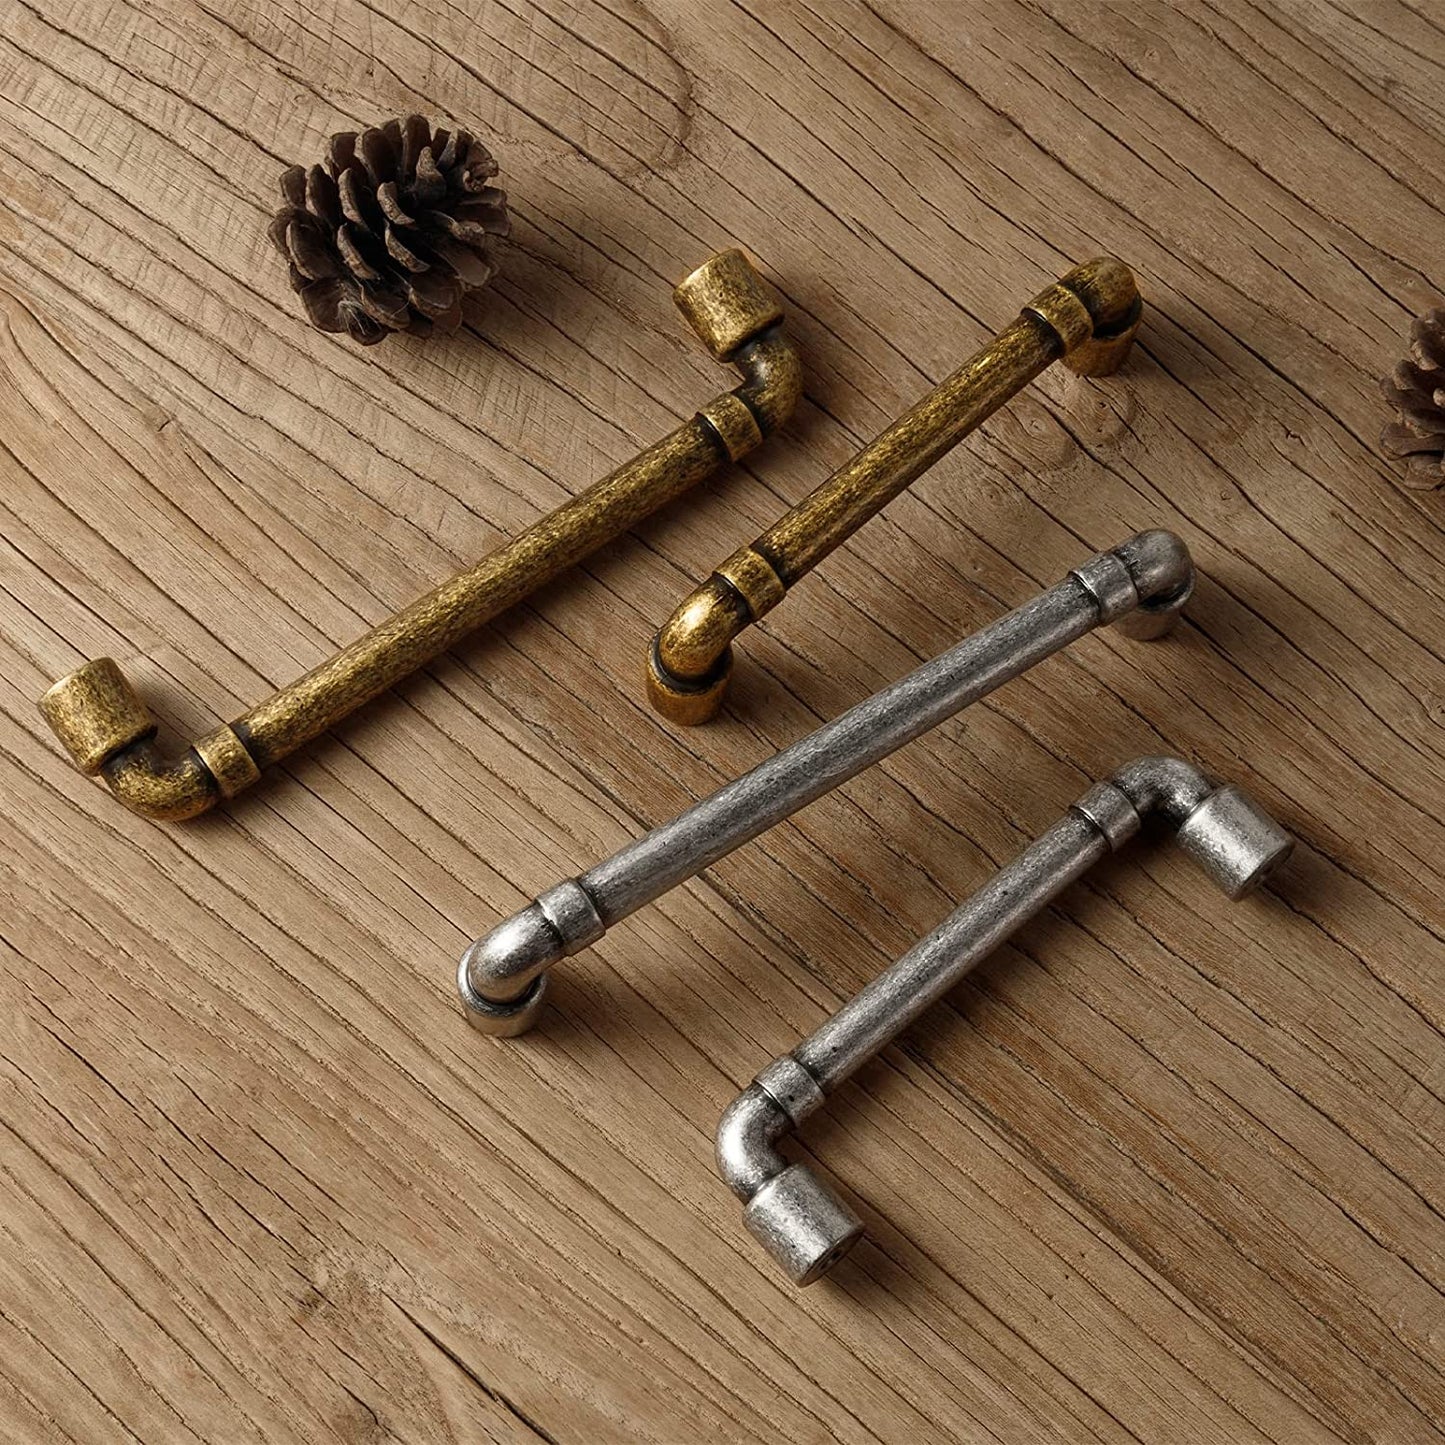 Industrial Retro Style Straight Tube Pull Vintage Solid Cabinet Pulls Drawer Handles 6 Pack